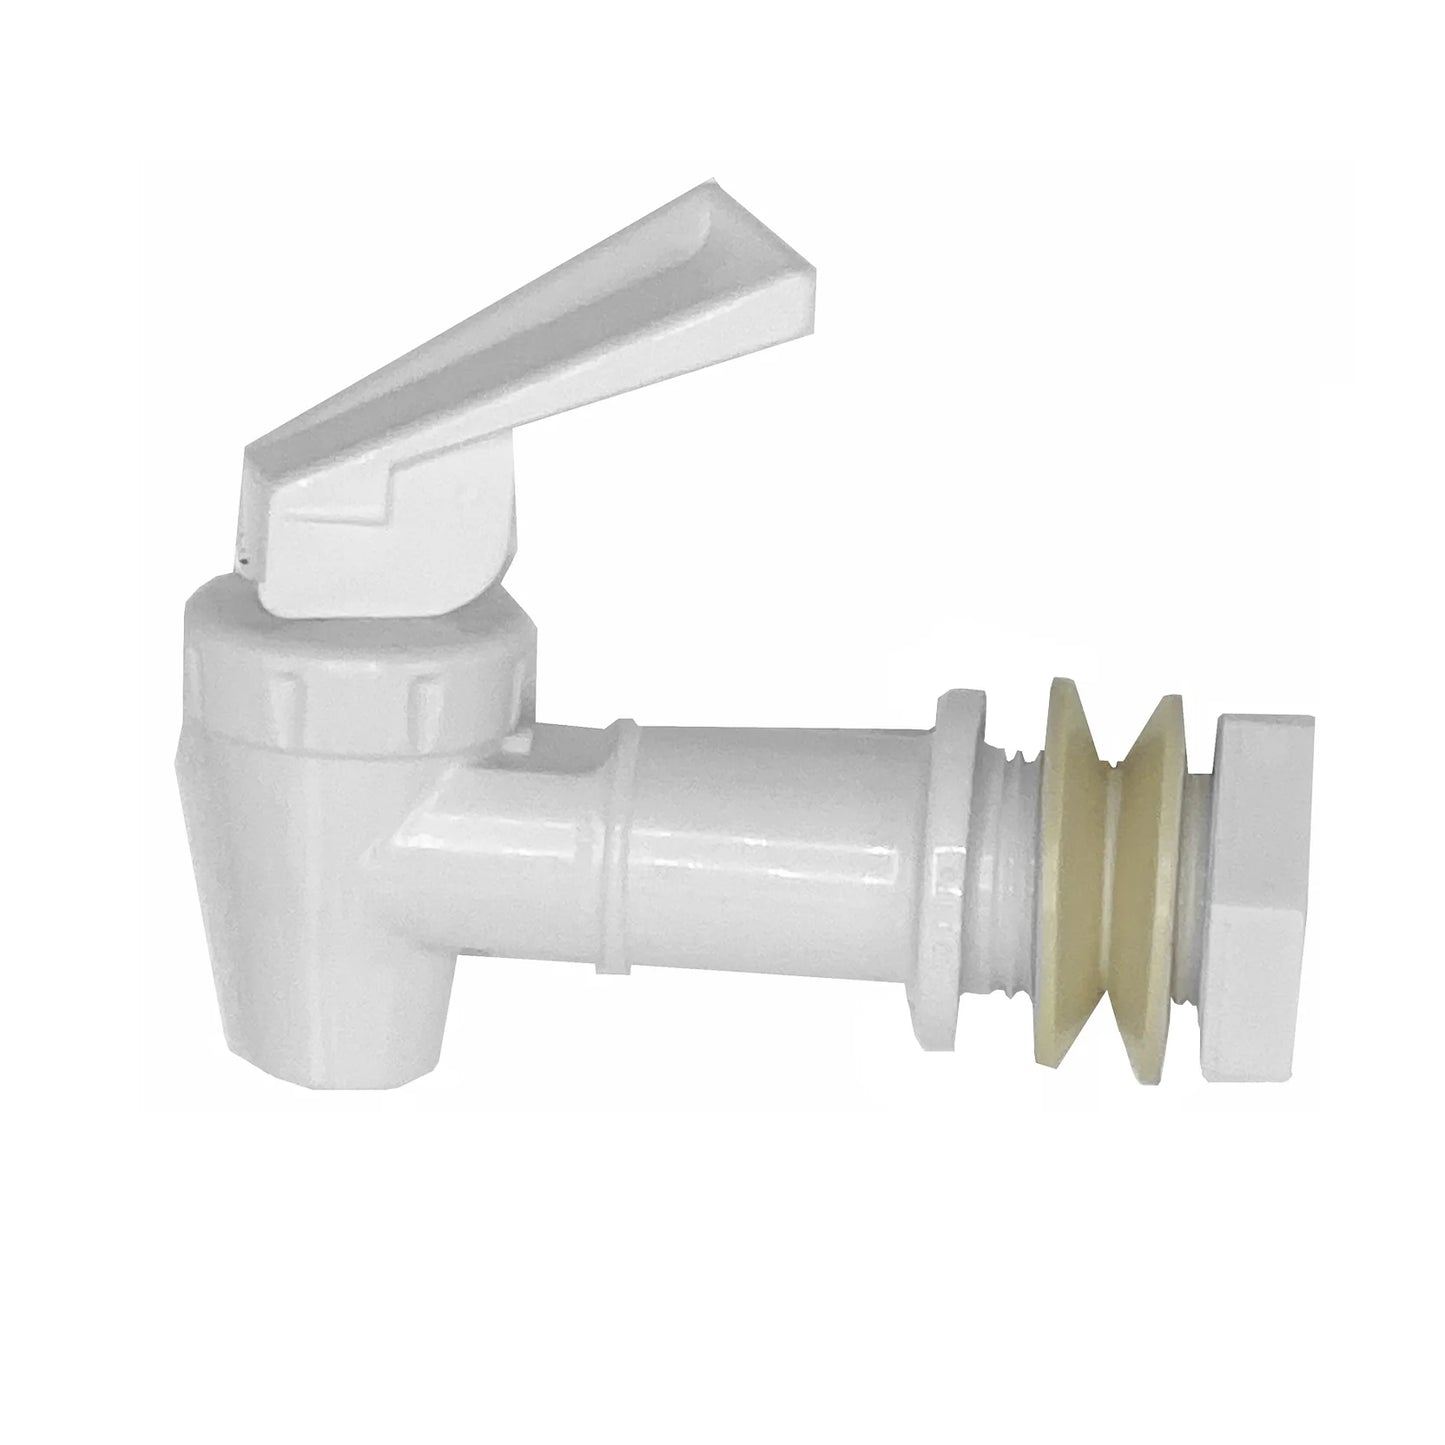 Water Pure Gravity Flow Filter with Spigot